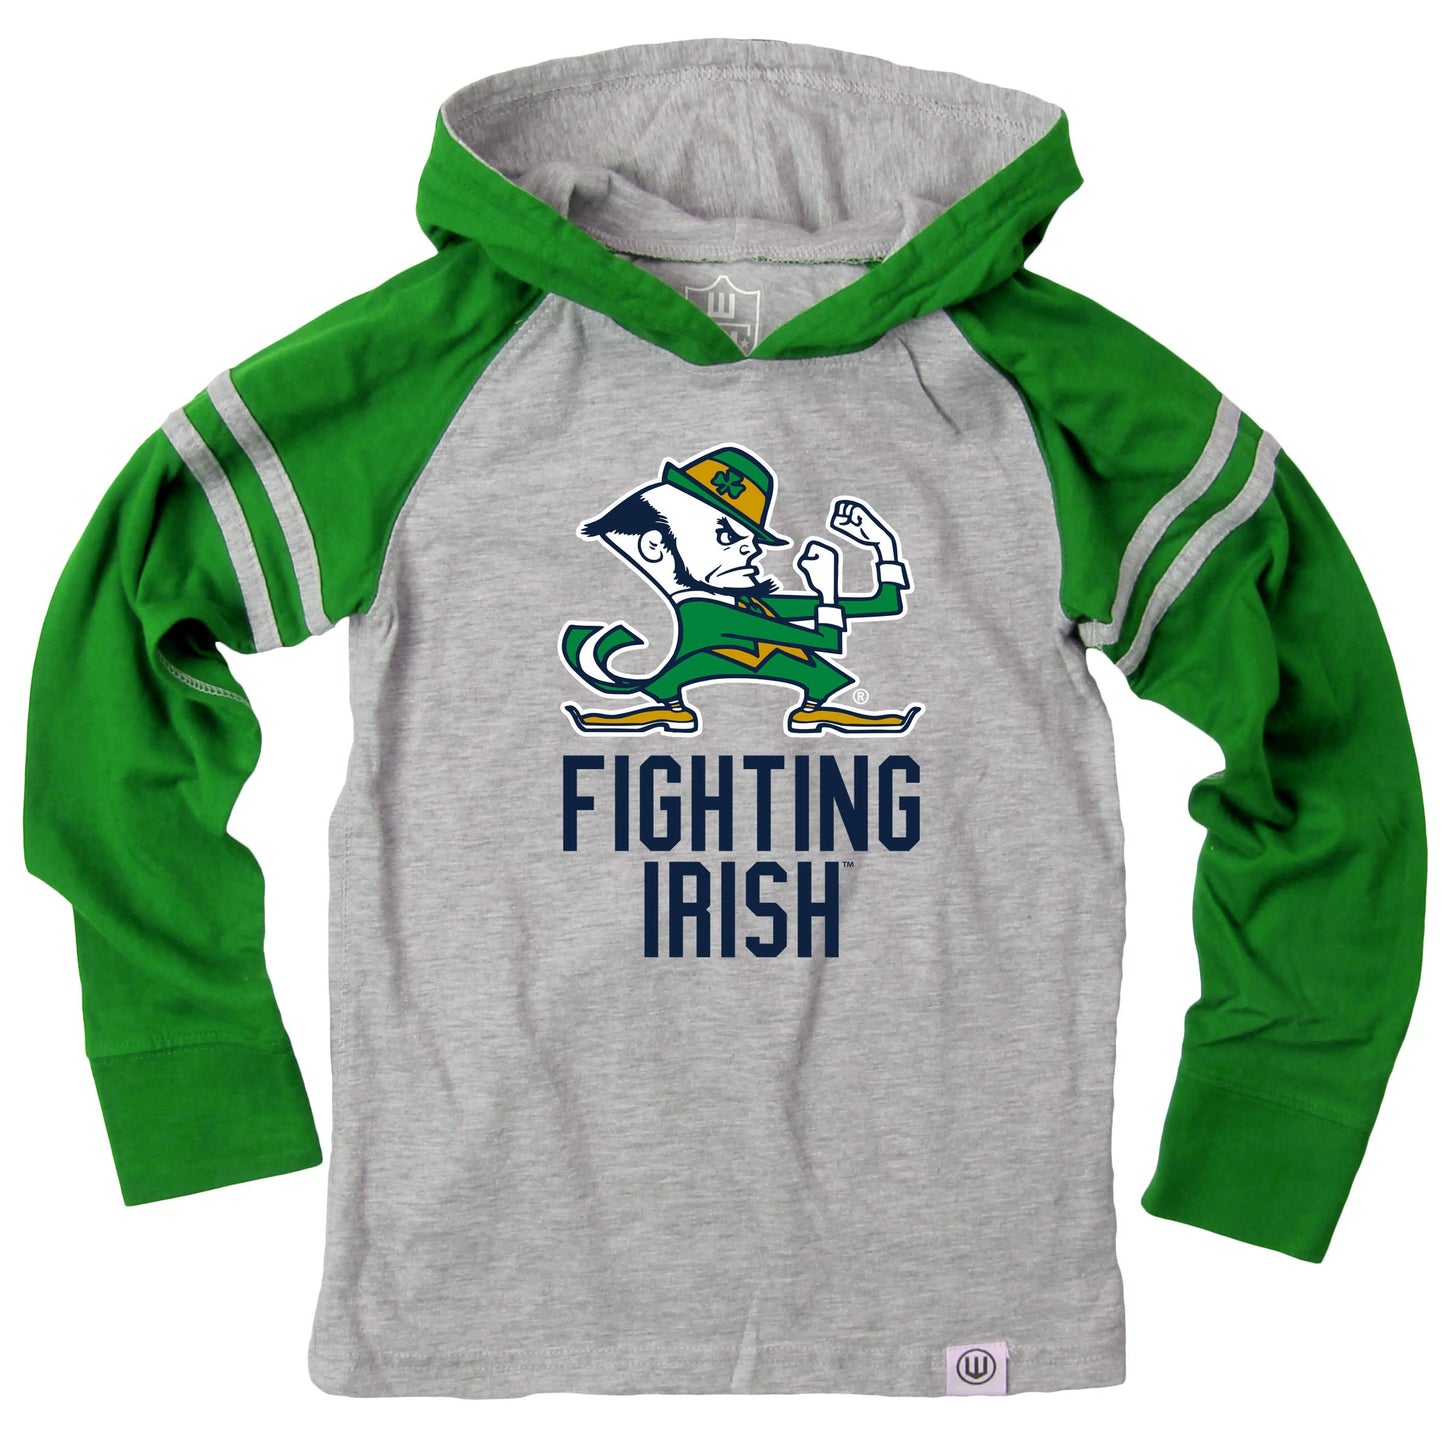 Notre Dame Fighting Irish Wes and Willy Youth and Little Boys Long Sleeve Hooded T-Shirt Striped Green